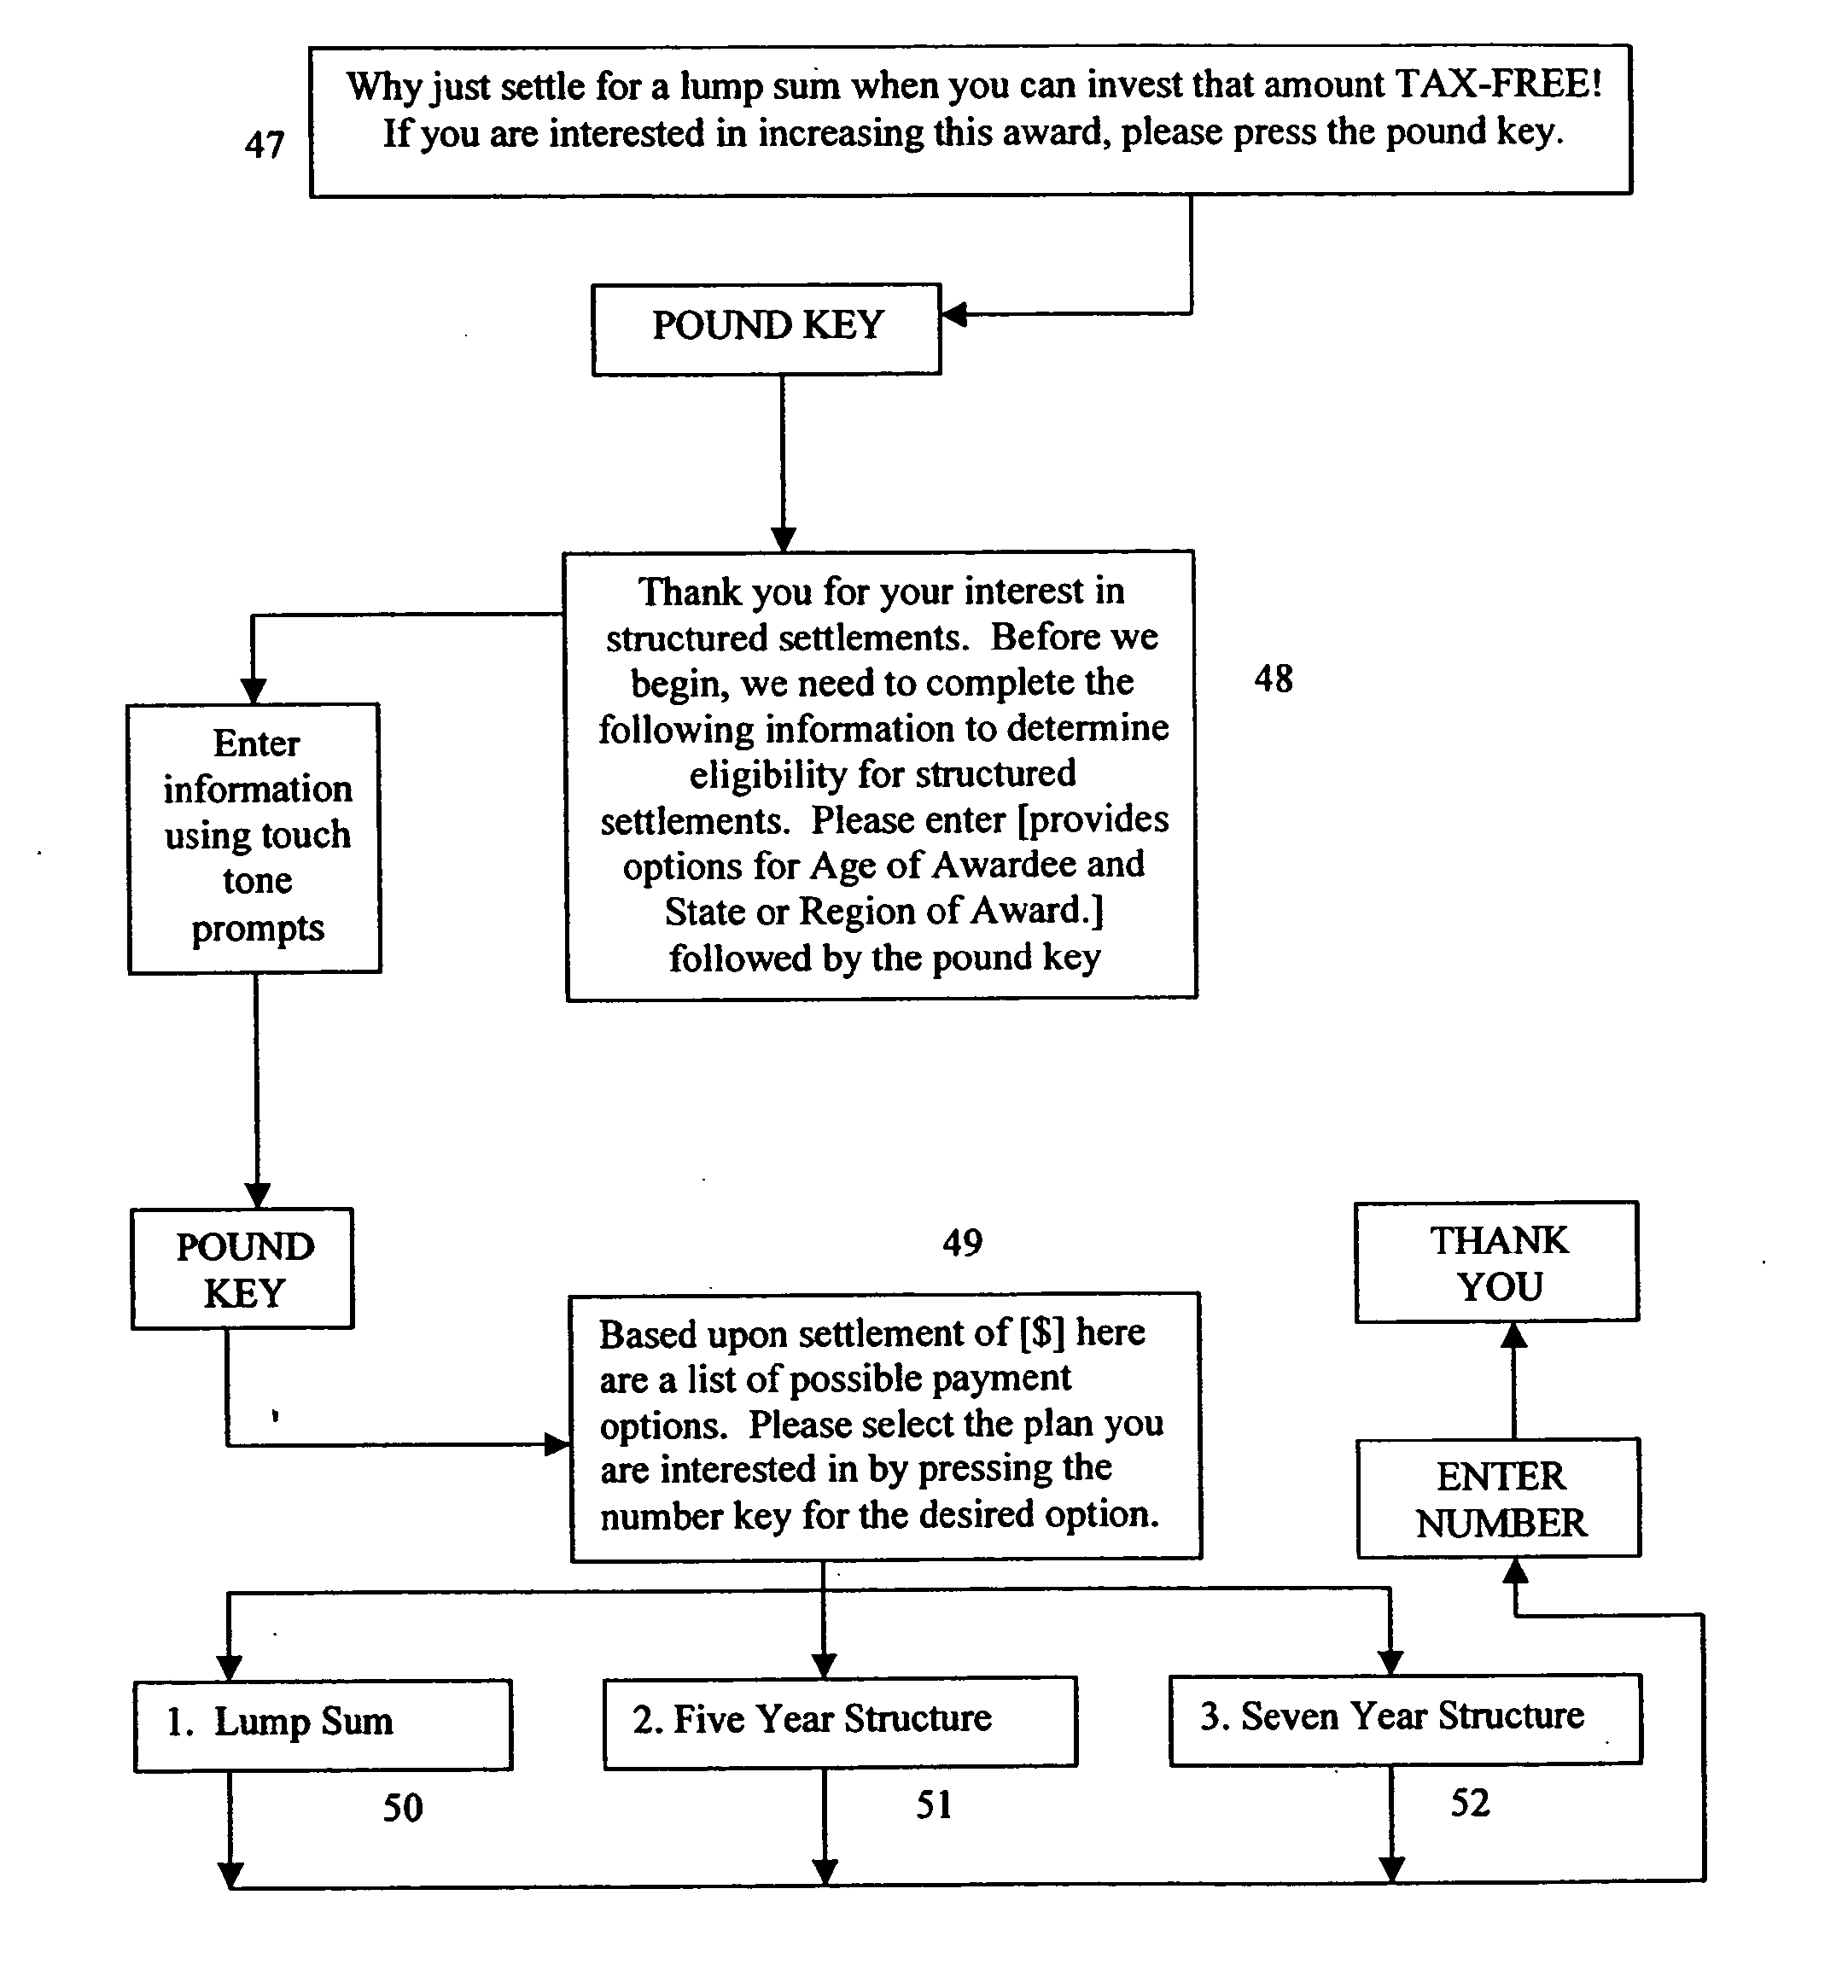 Computerized dispute resolution system and method